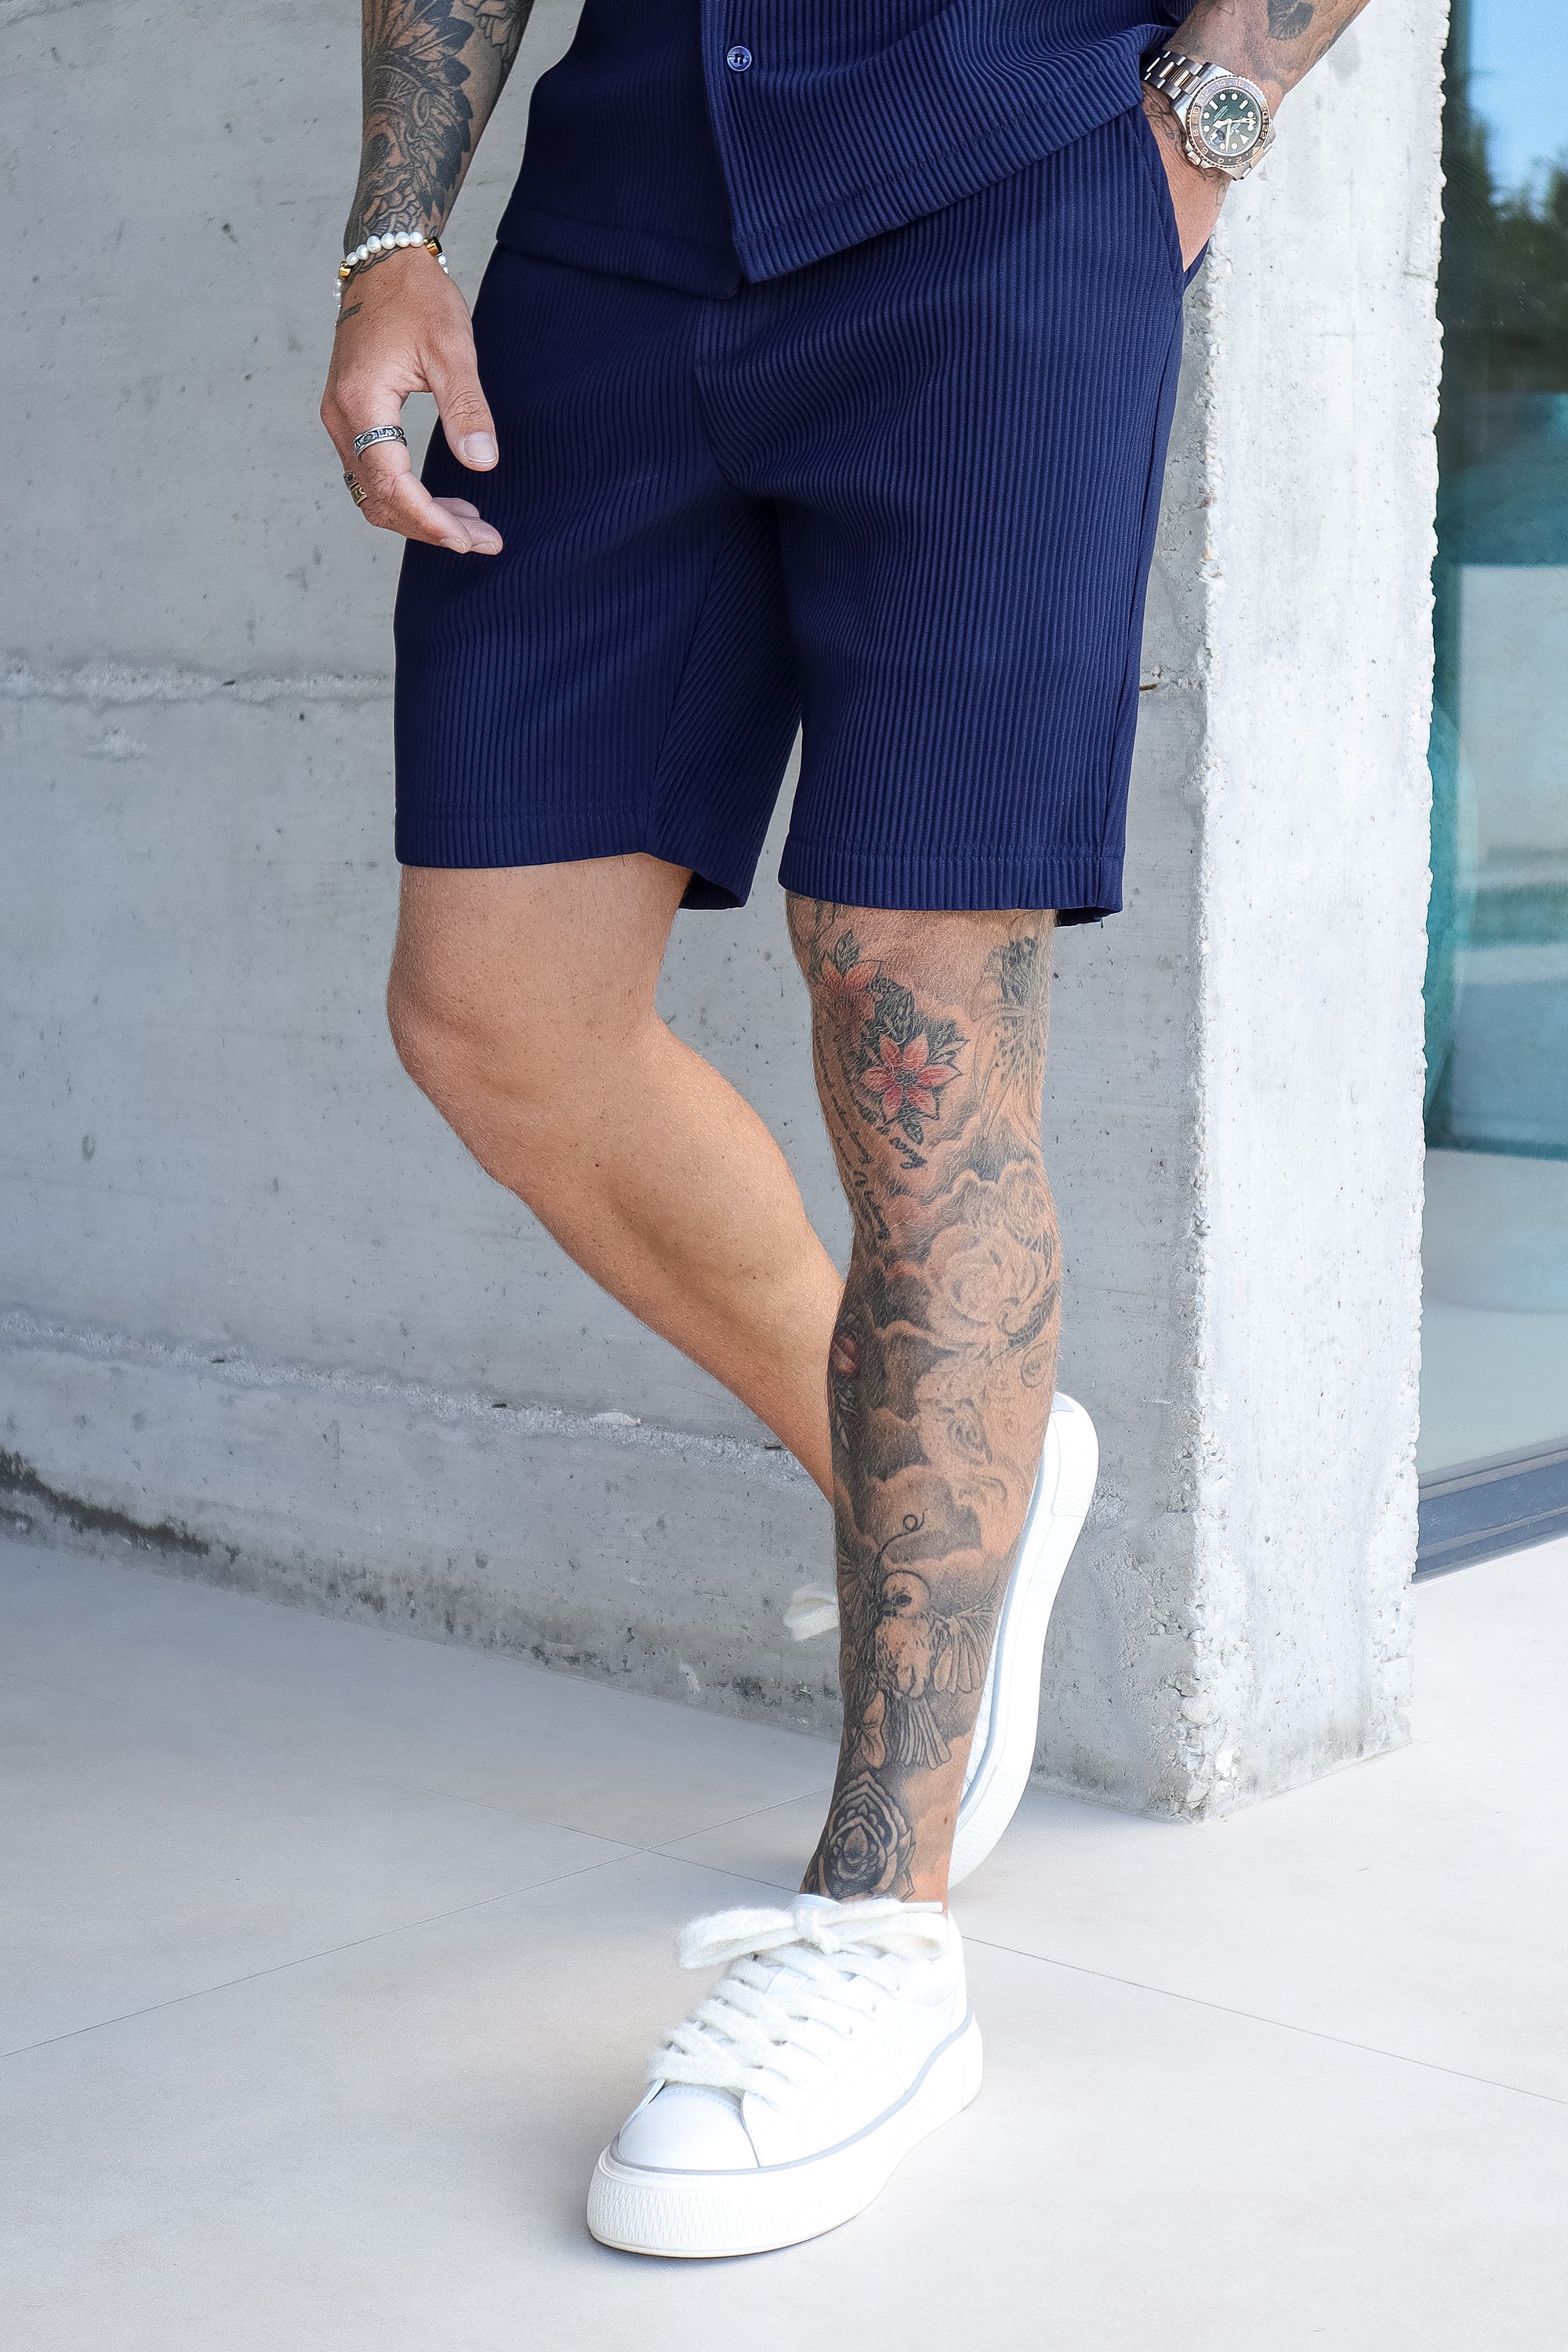 THE ICON. X ROSS CAMPBELL PLEATED SHORTS - NAVY BLUE